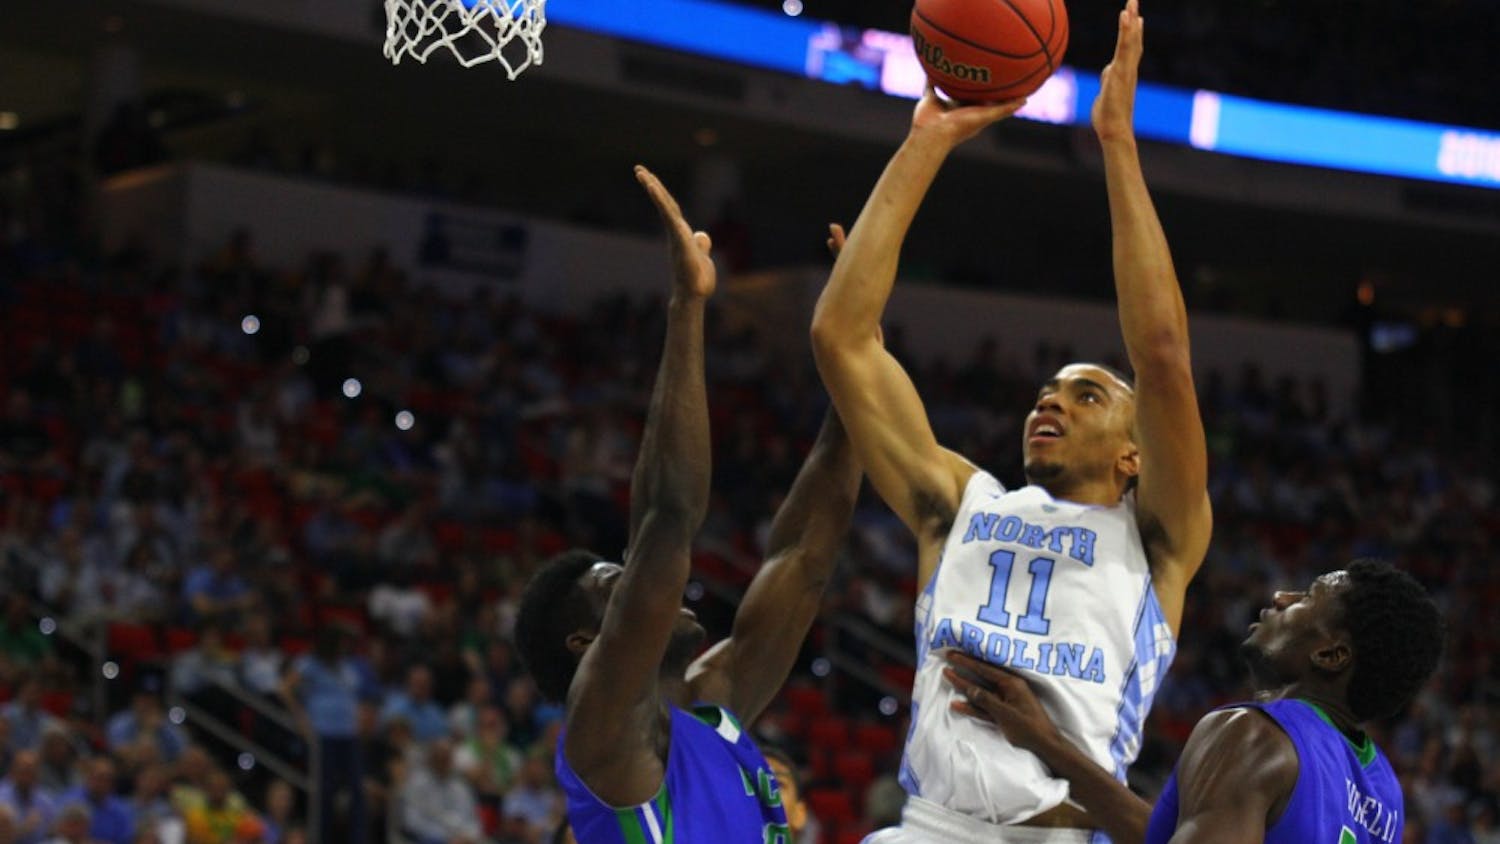 Brice Johnson shoots the ball in the first half.